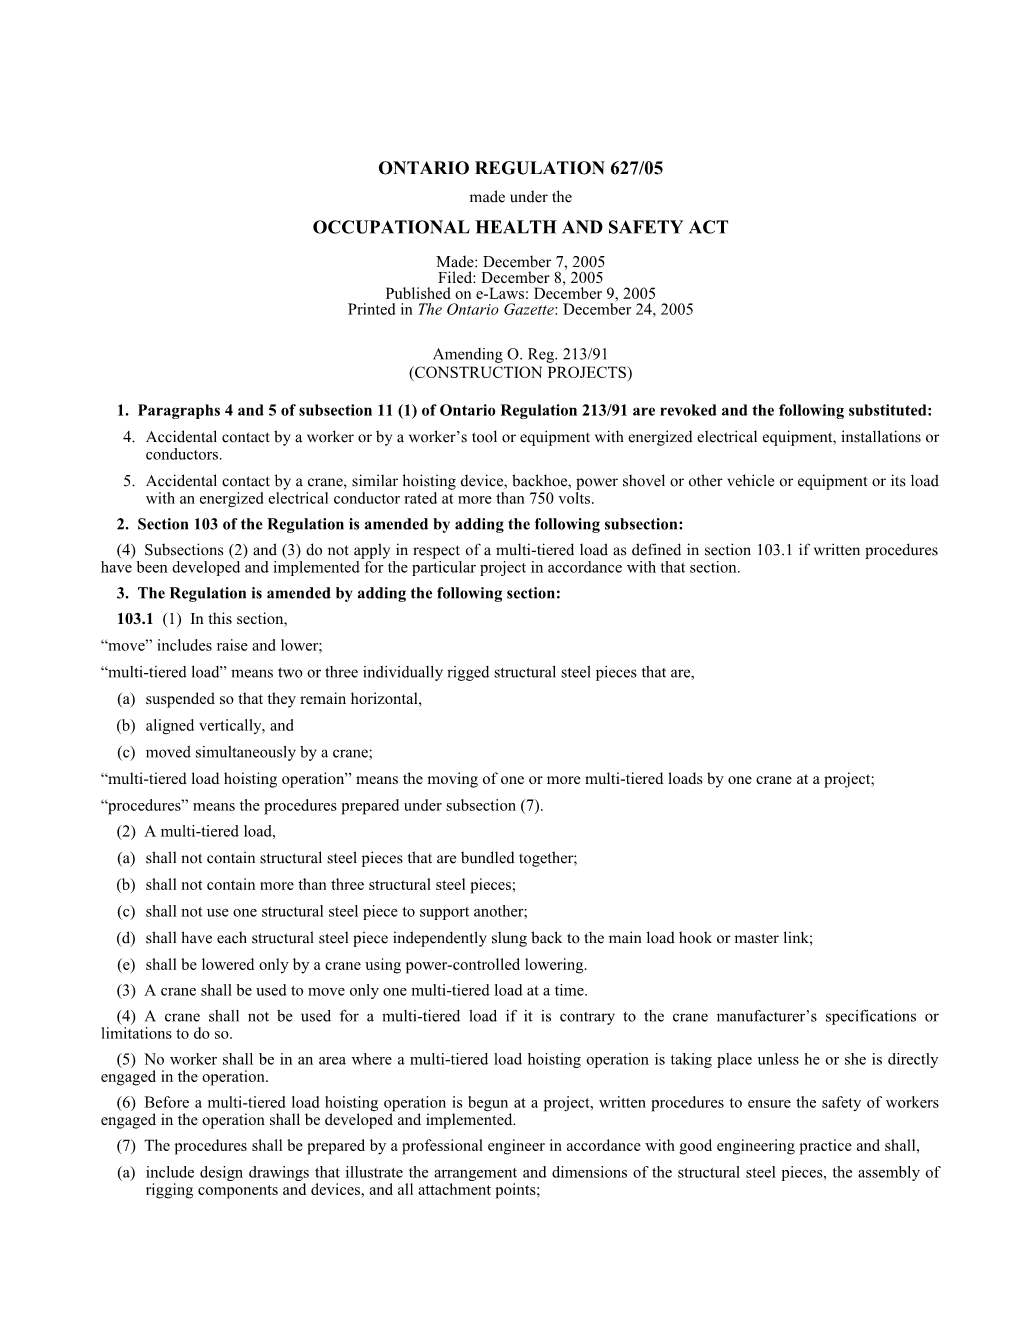 OCCUPATIONAL HEALTH and SAFETY ACT - O. Reg. 627/05